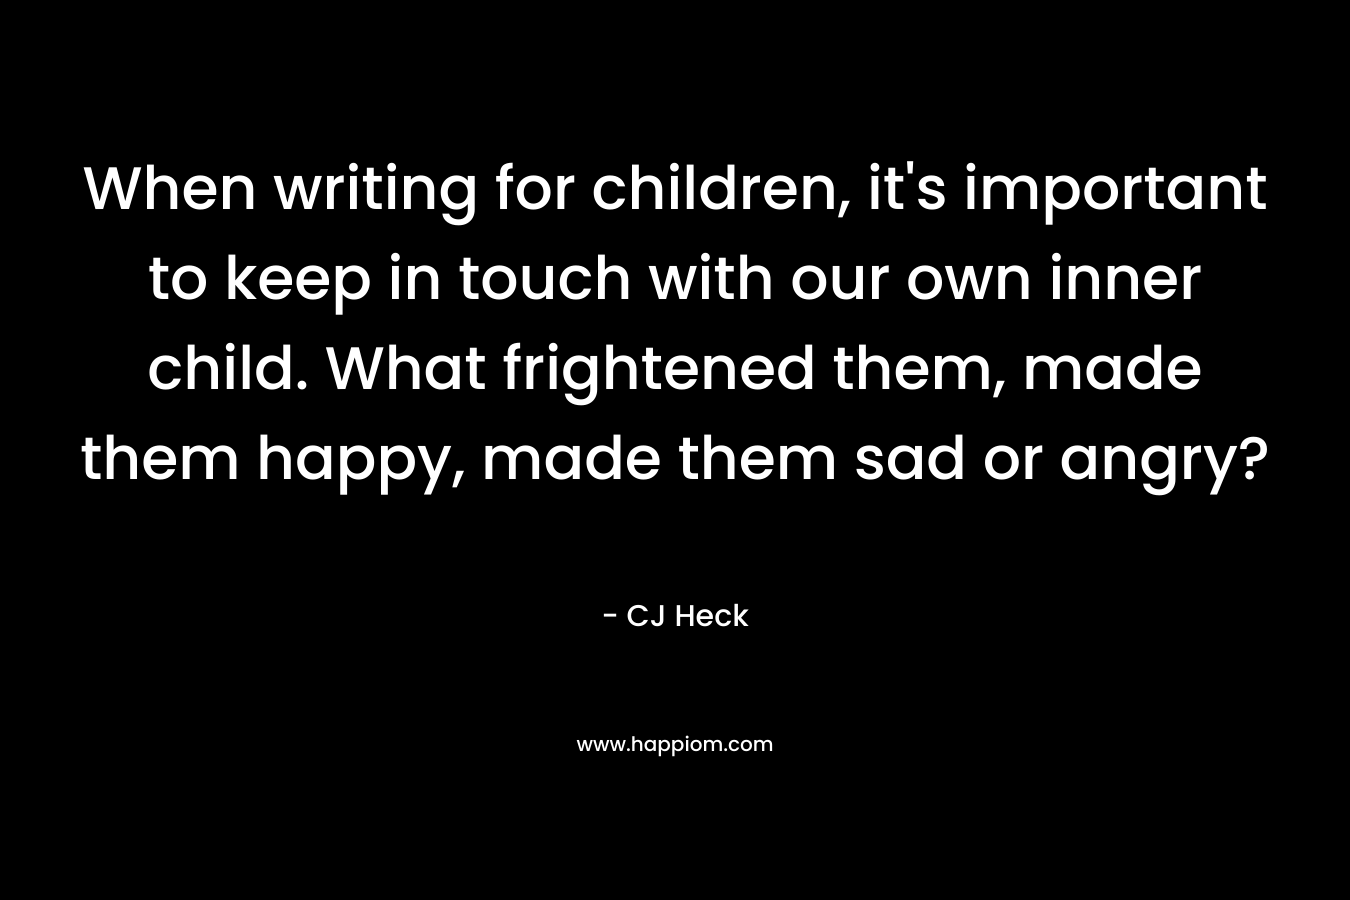 When writing for children, it’s important to keep in touch with our own inner child. What frightened them, made them happy, made them sad or angry? – CJ Heck